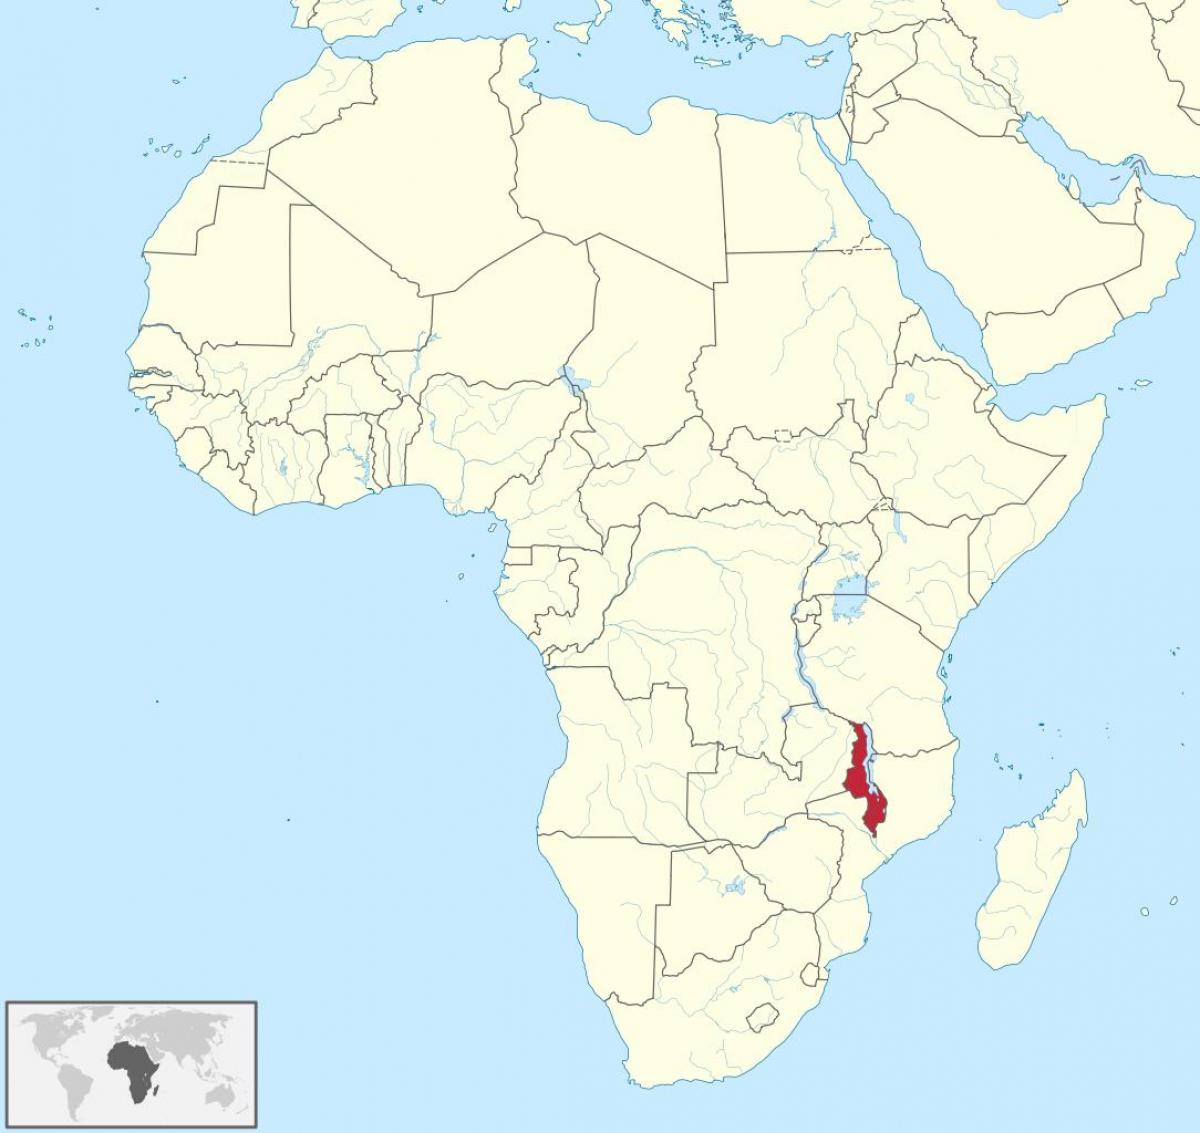 map of africa showing Malawi